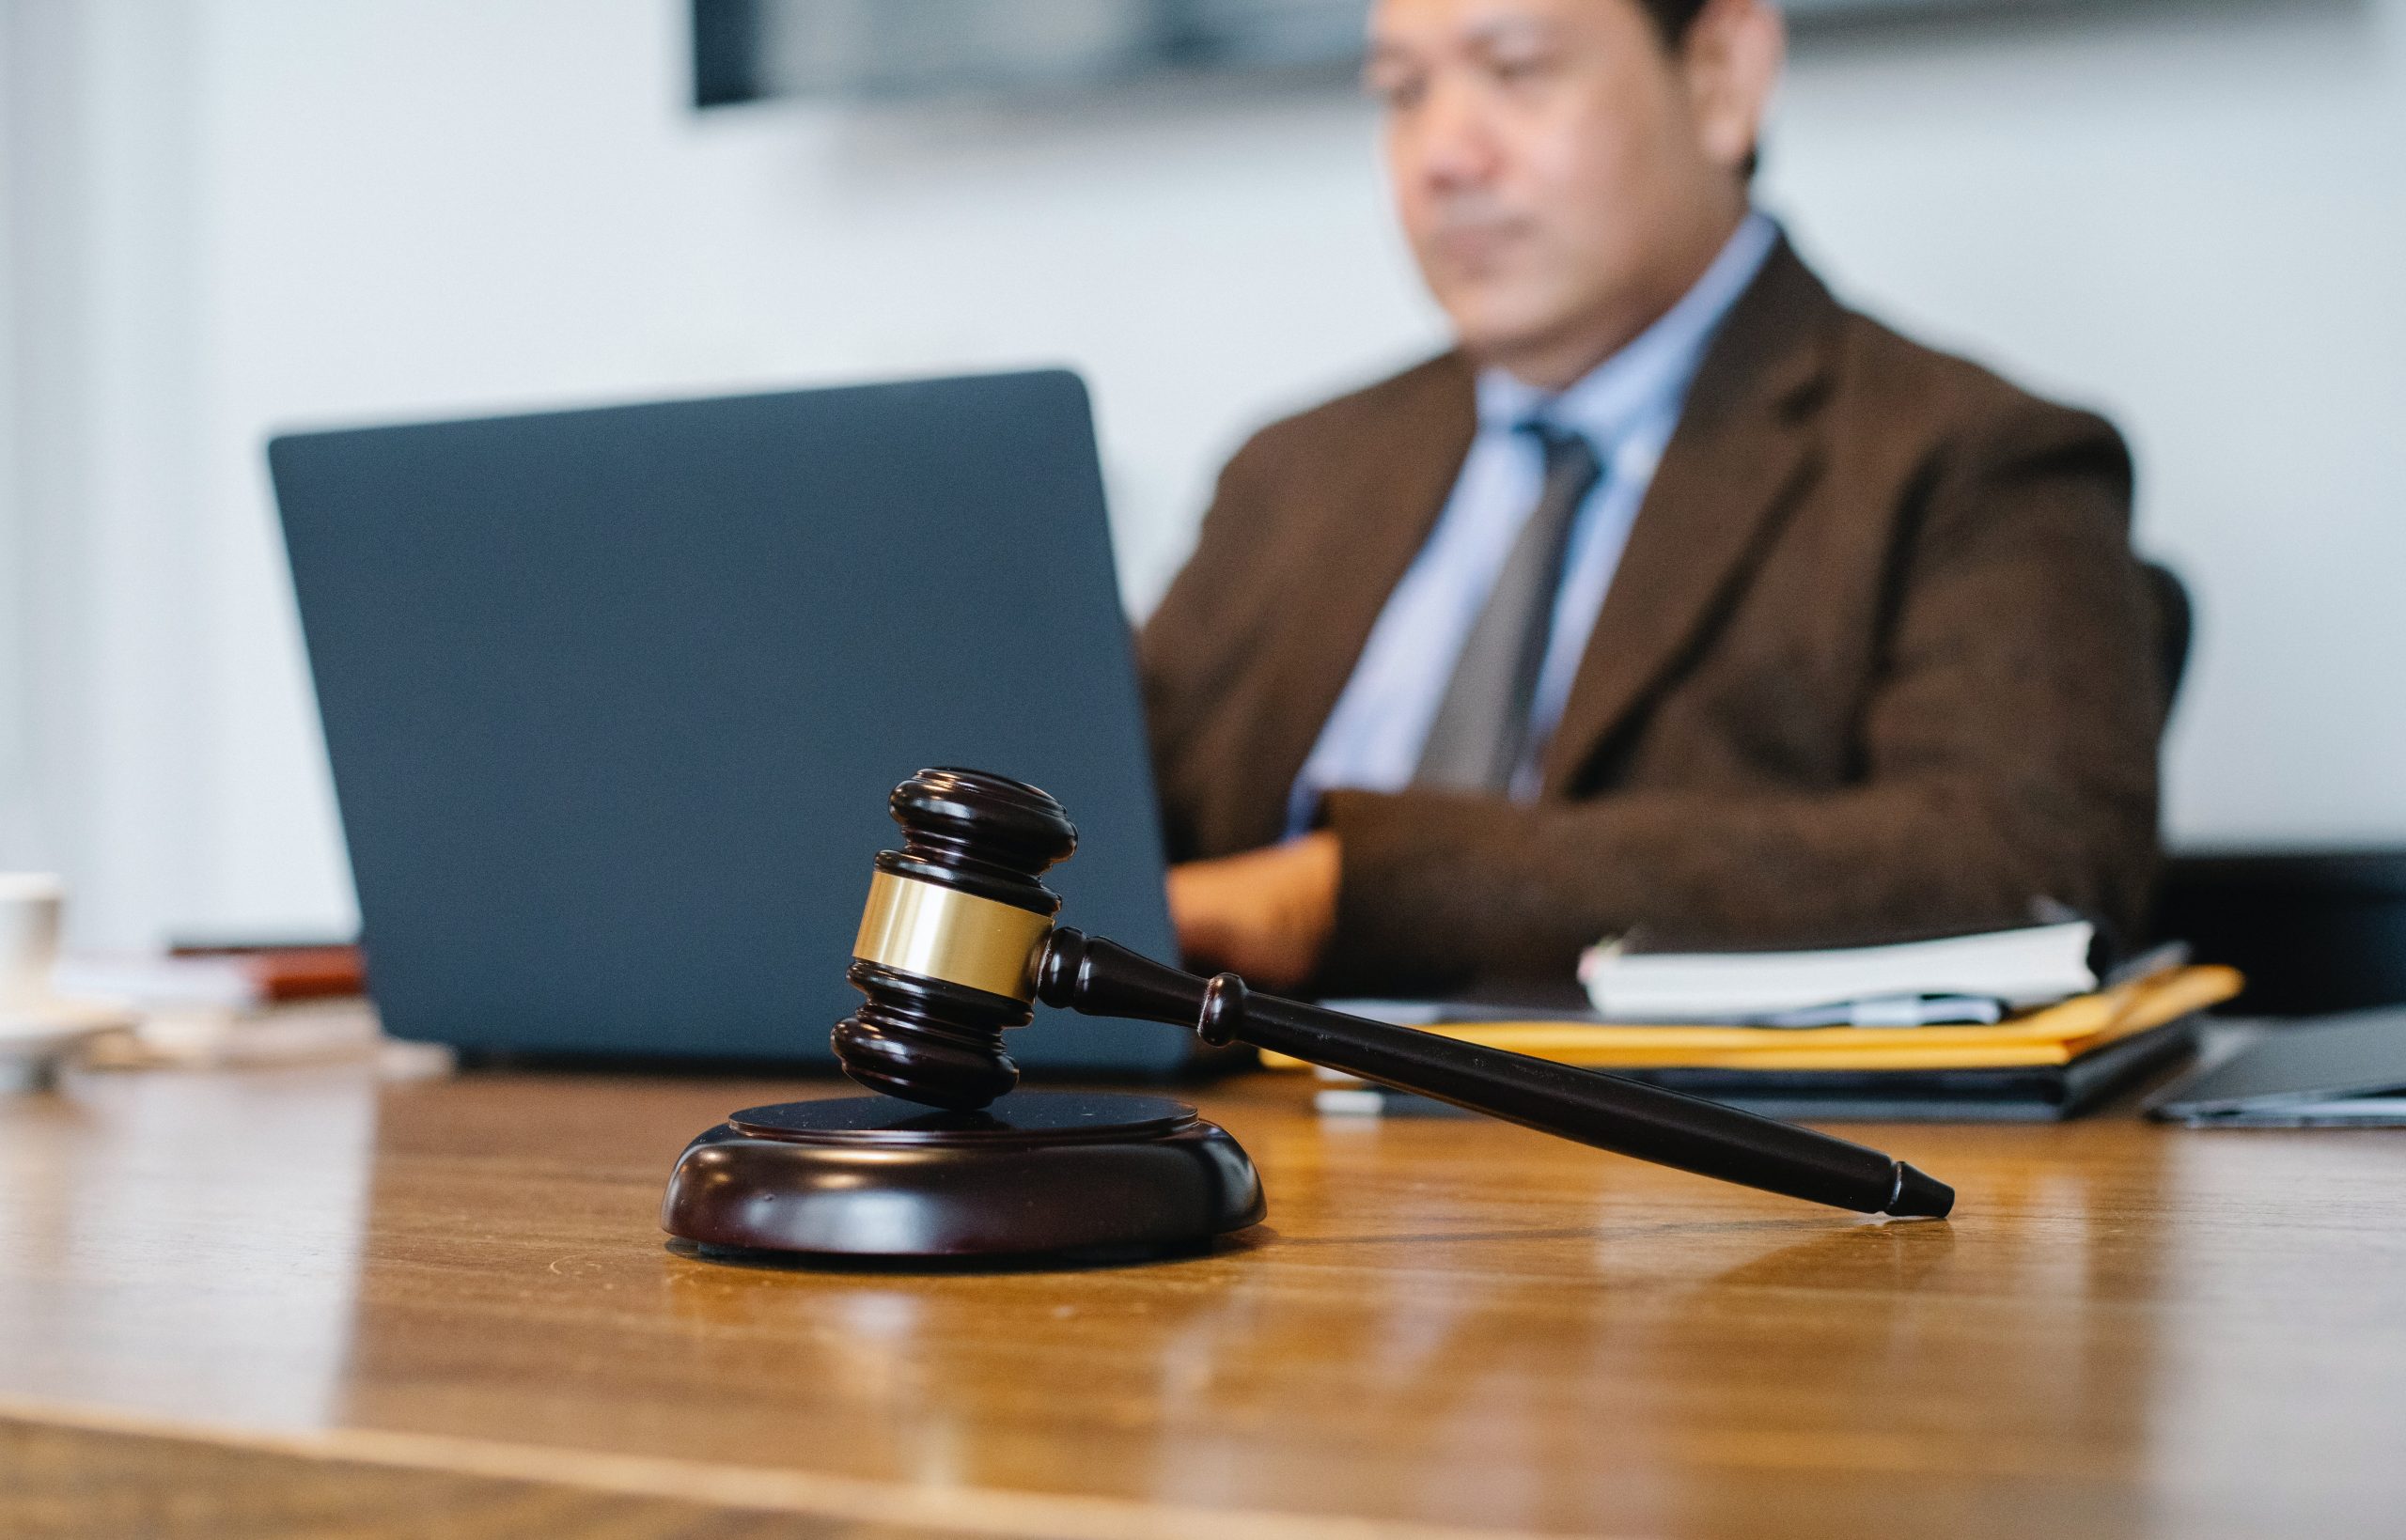 Blurred focus photo of a gavel in front of a plain-clothes judge working on a laptop computer